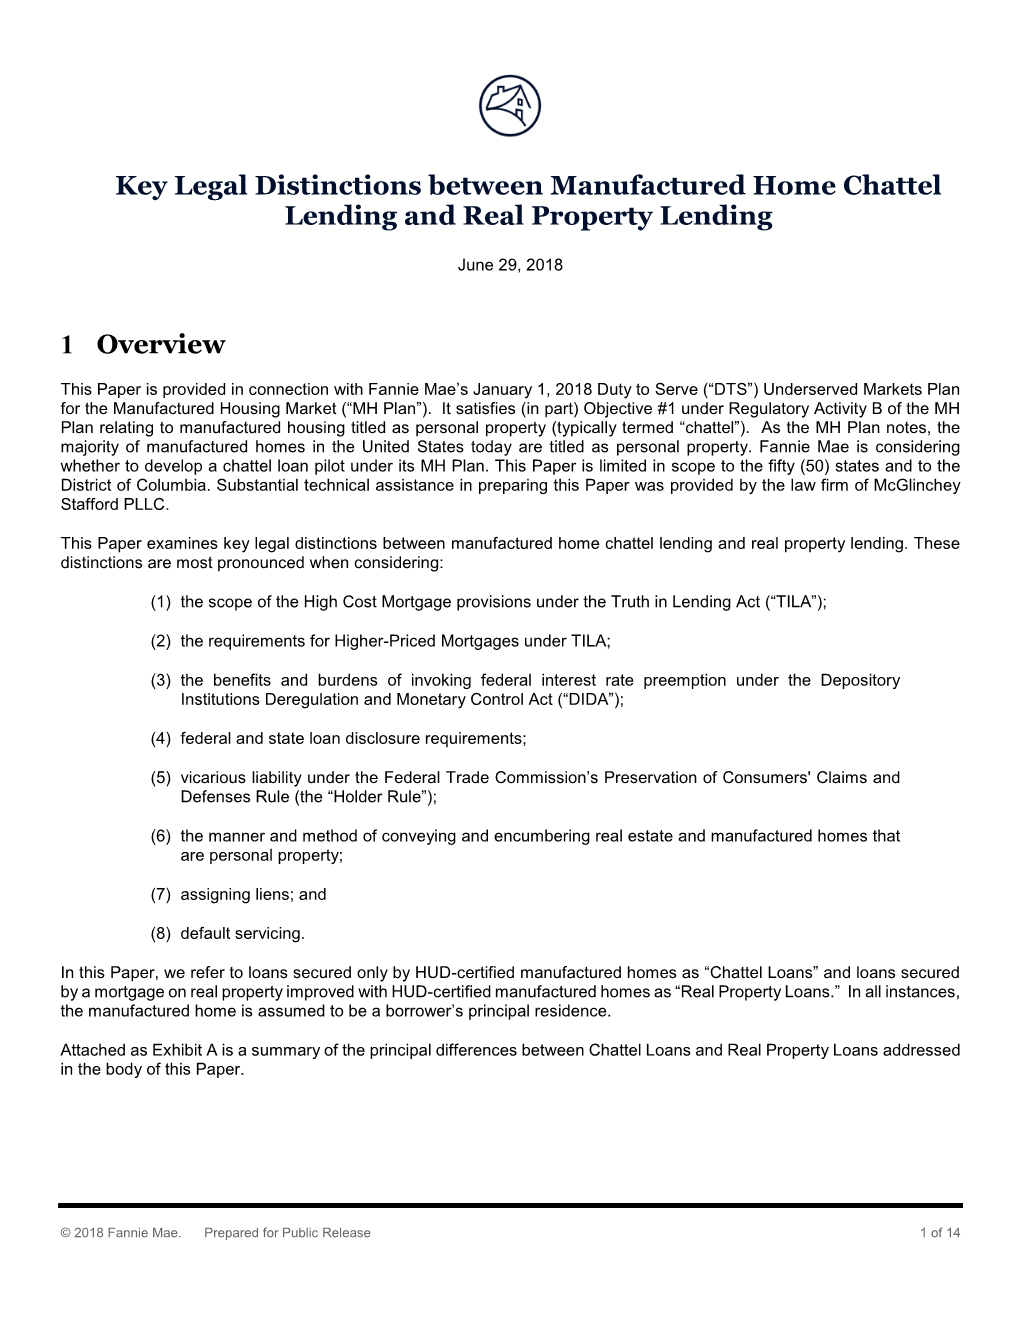 Key Legal Distinctions Between Manufactured Home Chattel Lending and Real Property Lending